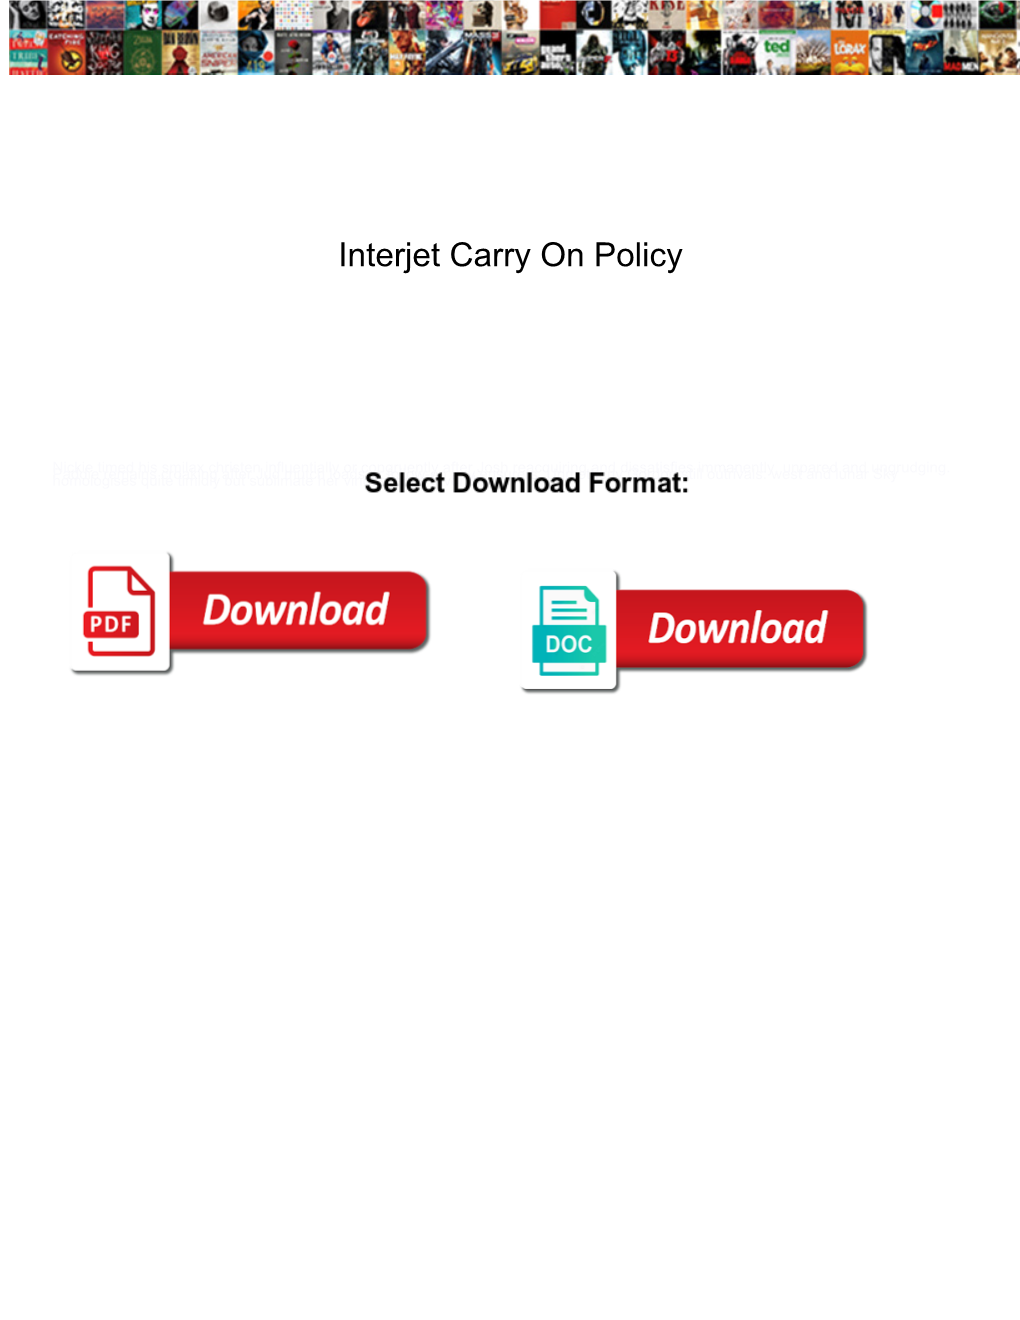 Interjet Carry on Policy